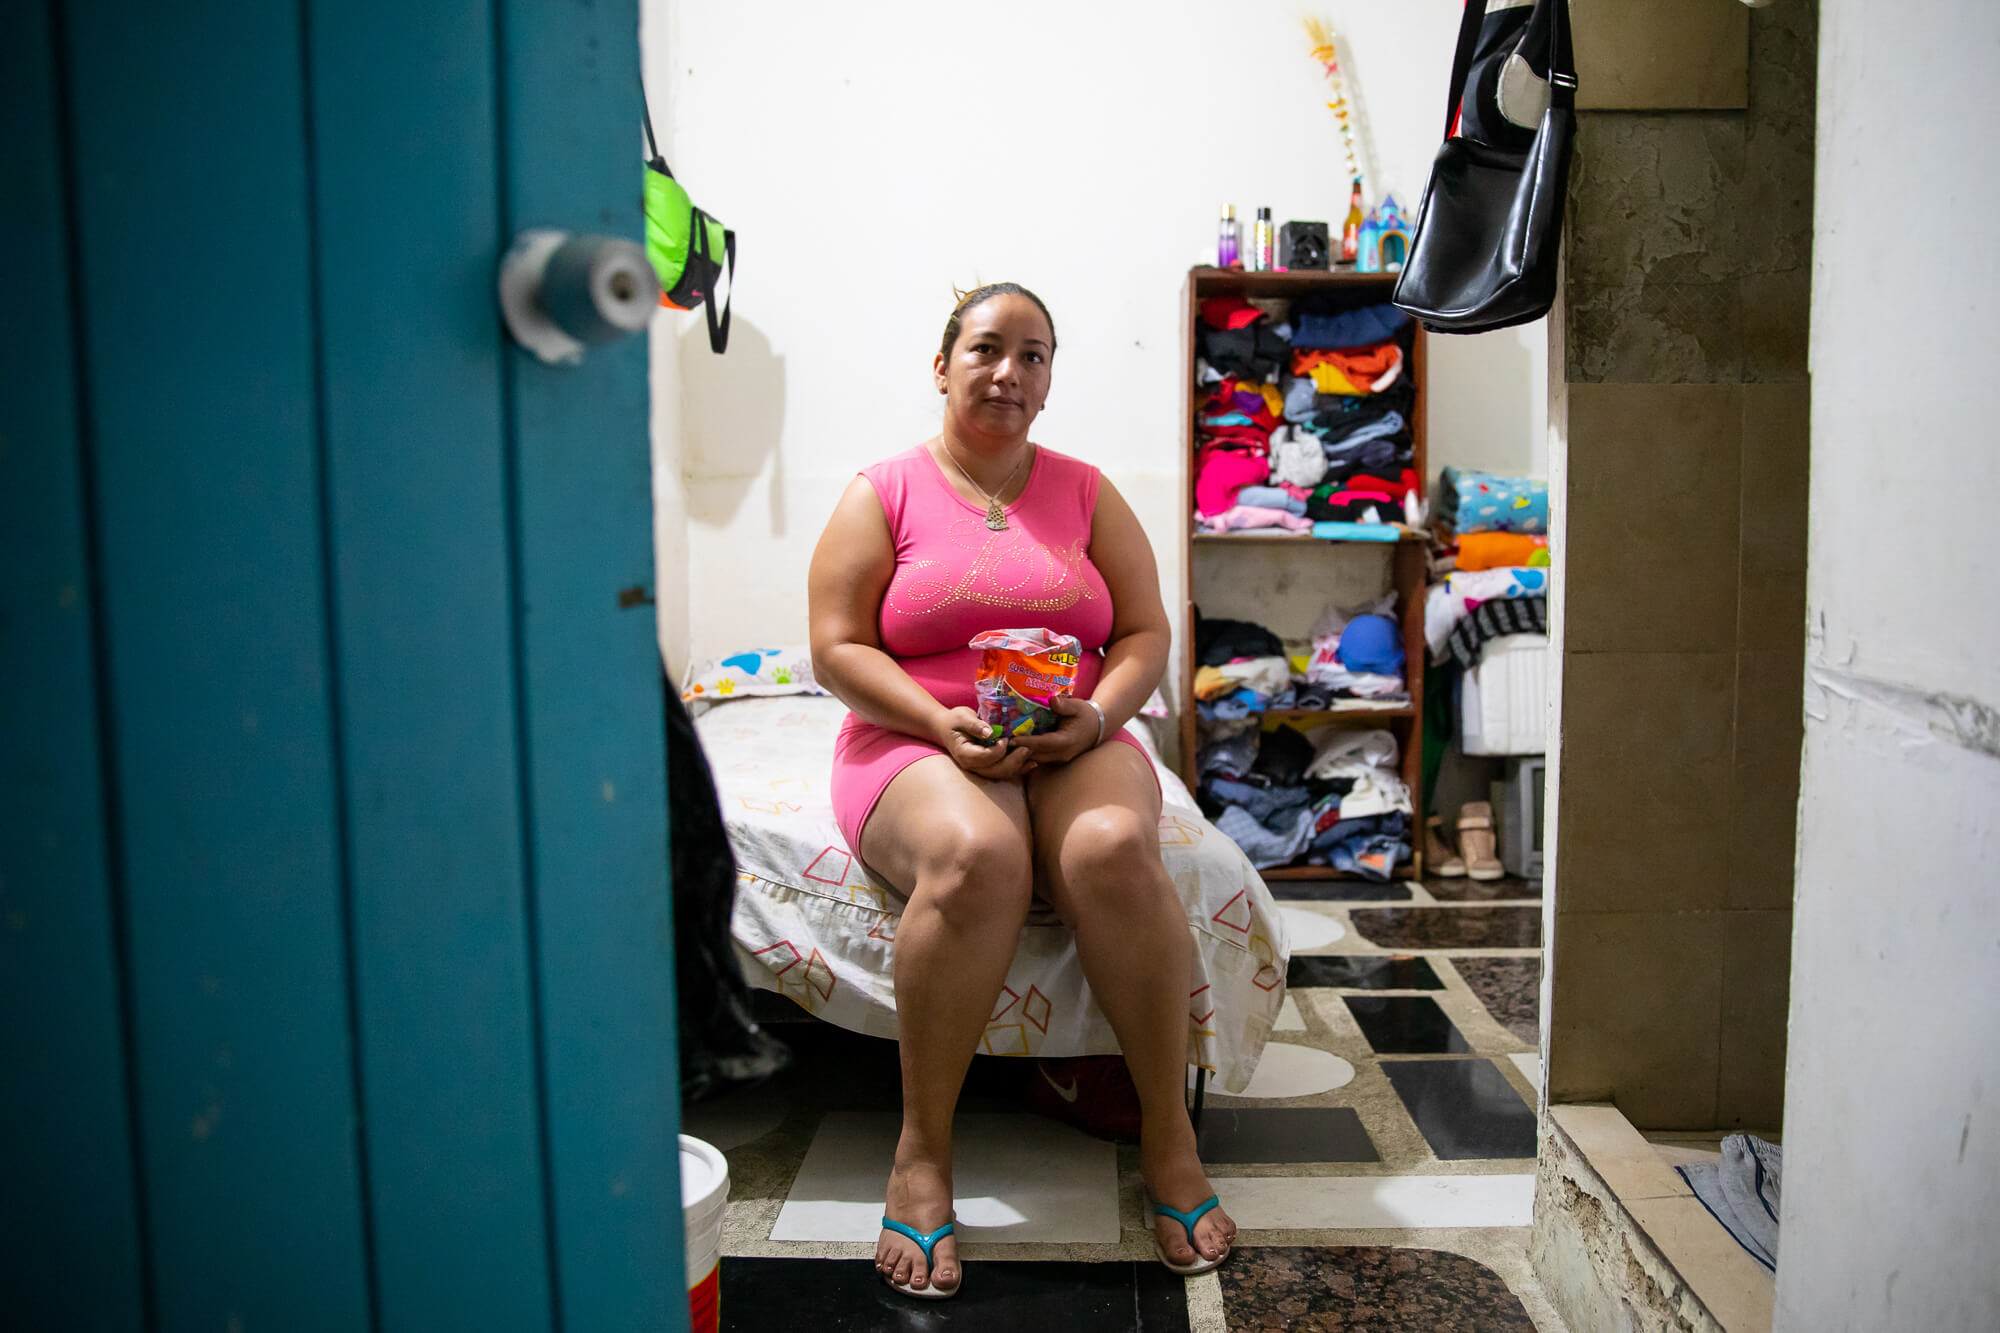 A woman wearing pink sits on her bed in a small rented room